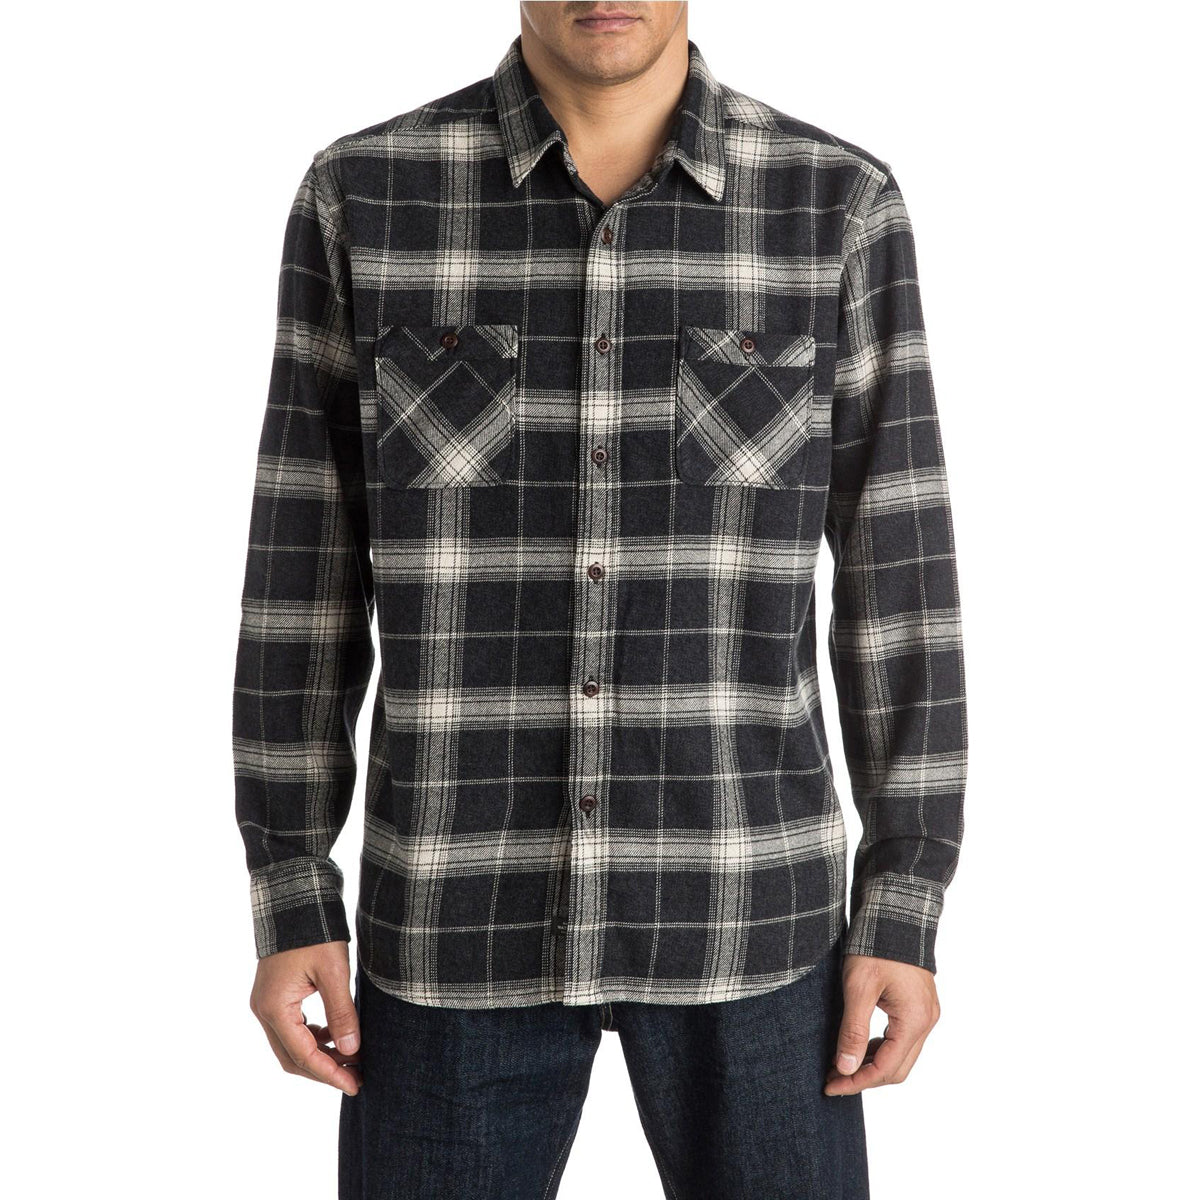 Quiksilver Go Forth Men's Button Up Long-Sleeve Shirts - Ensign Blue